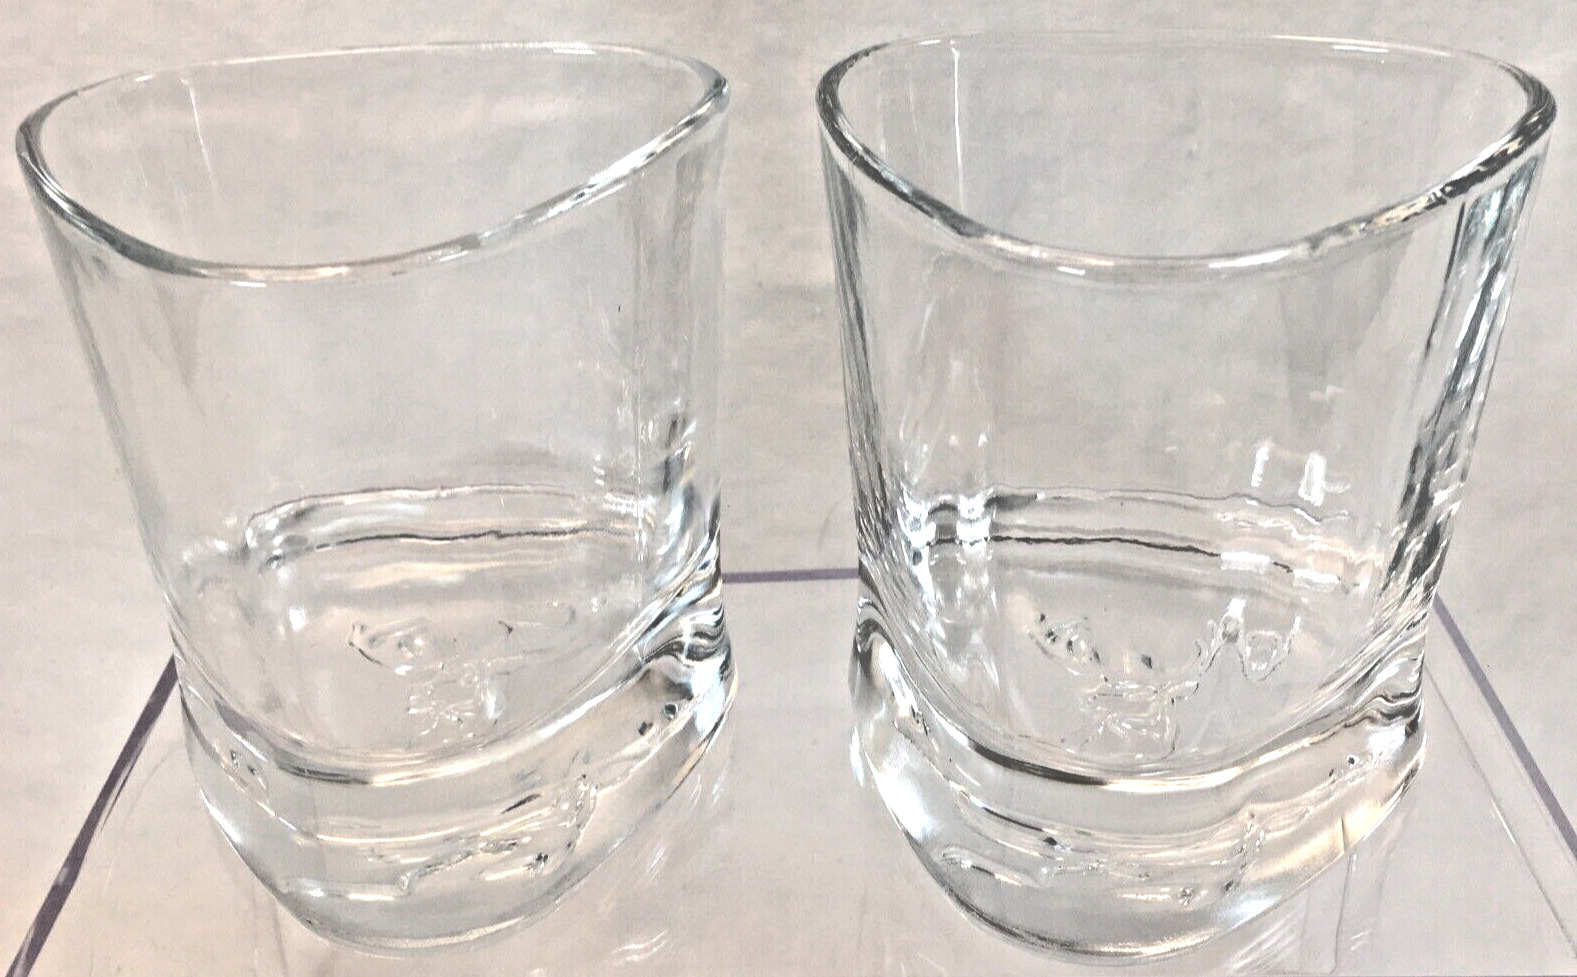 Triangle Shaped Heavy Bottom Glasses With Deer/Buck Embossed on The Bottom